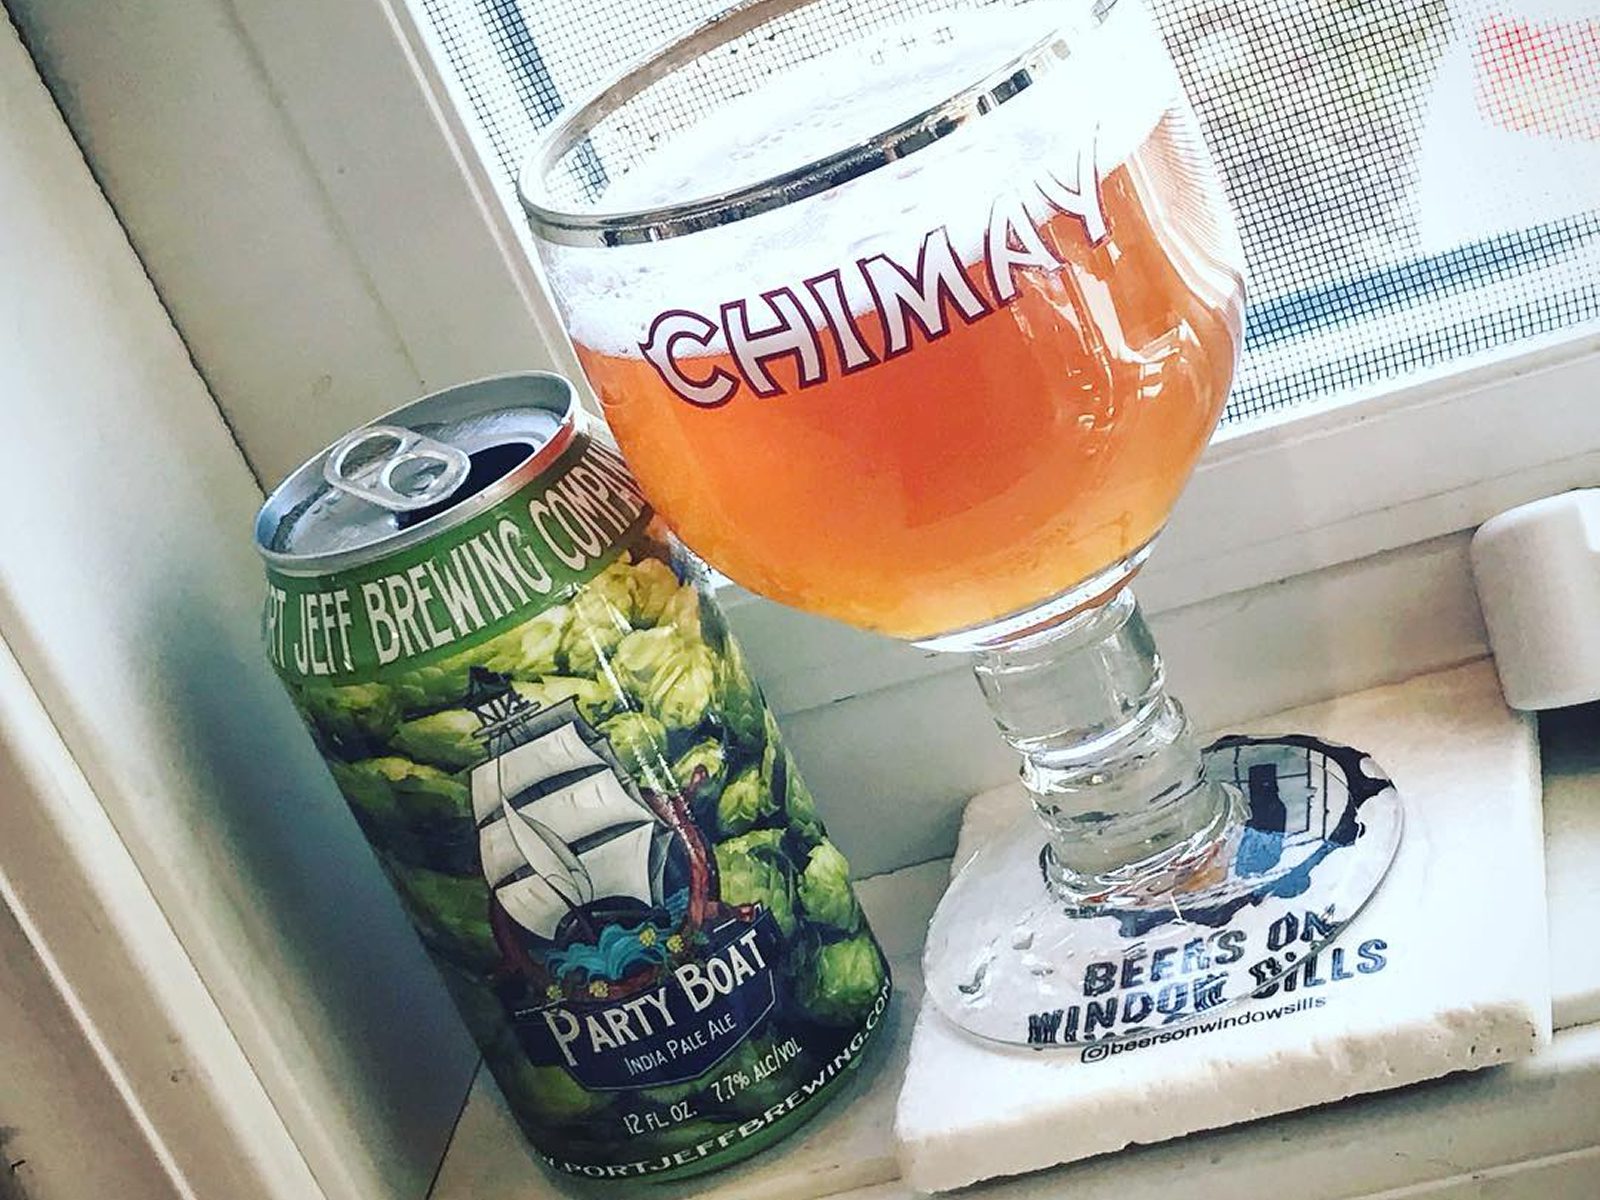 Port Jeff Brewing Company: Party Boat IPA